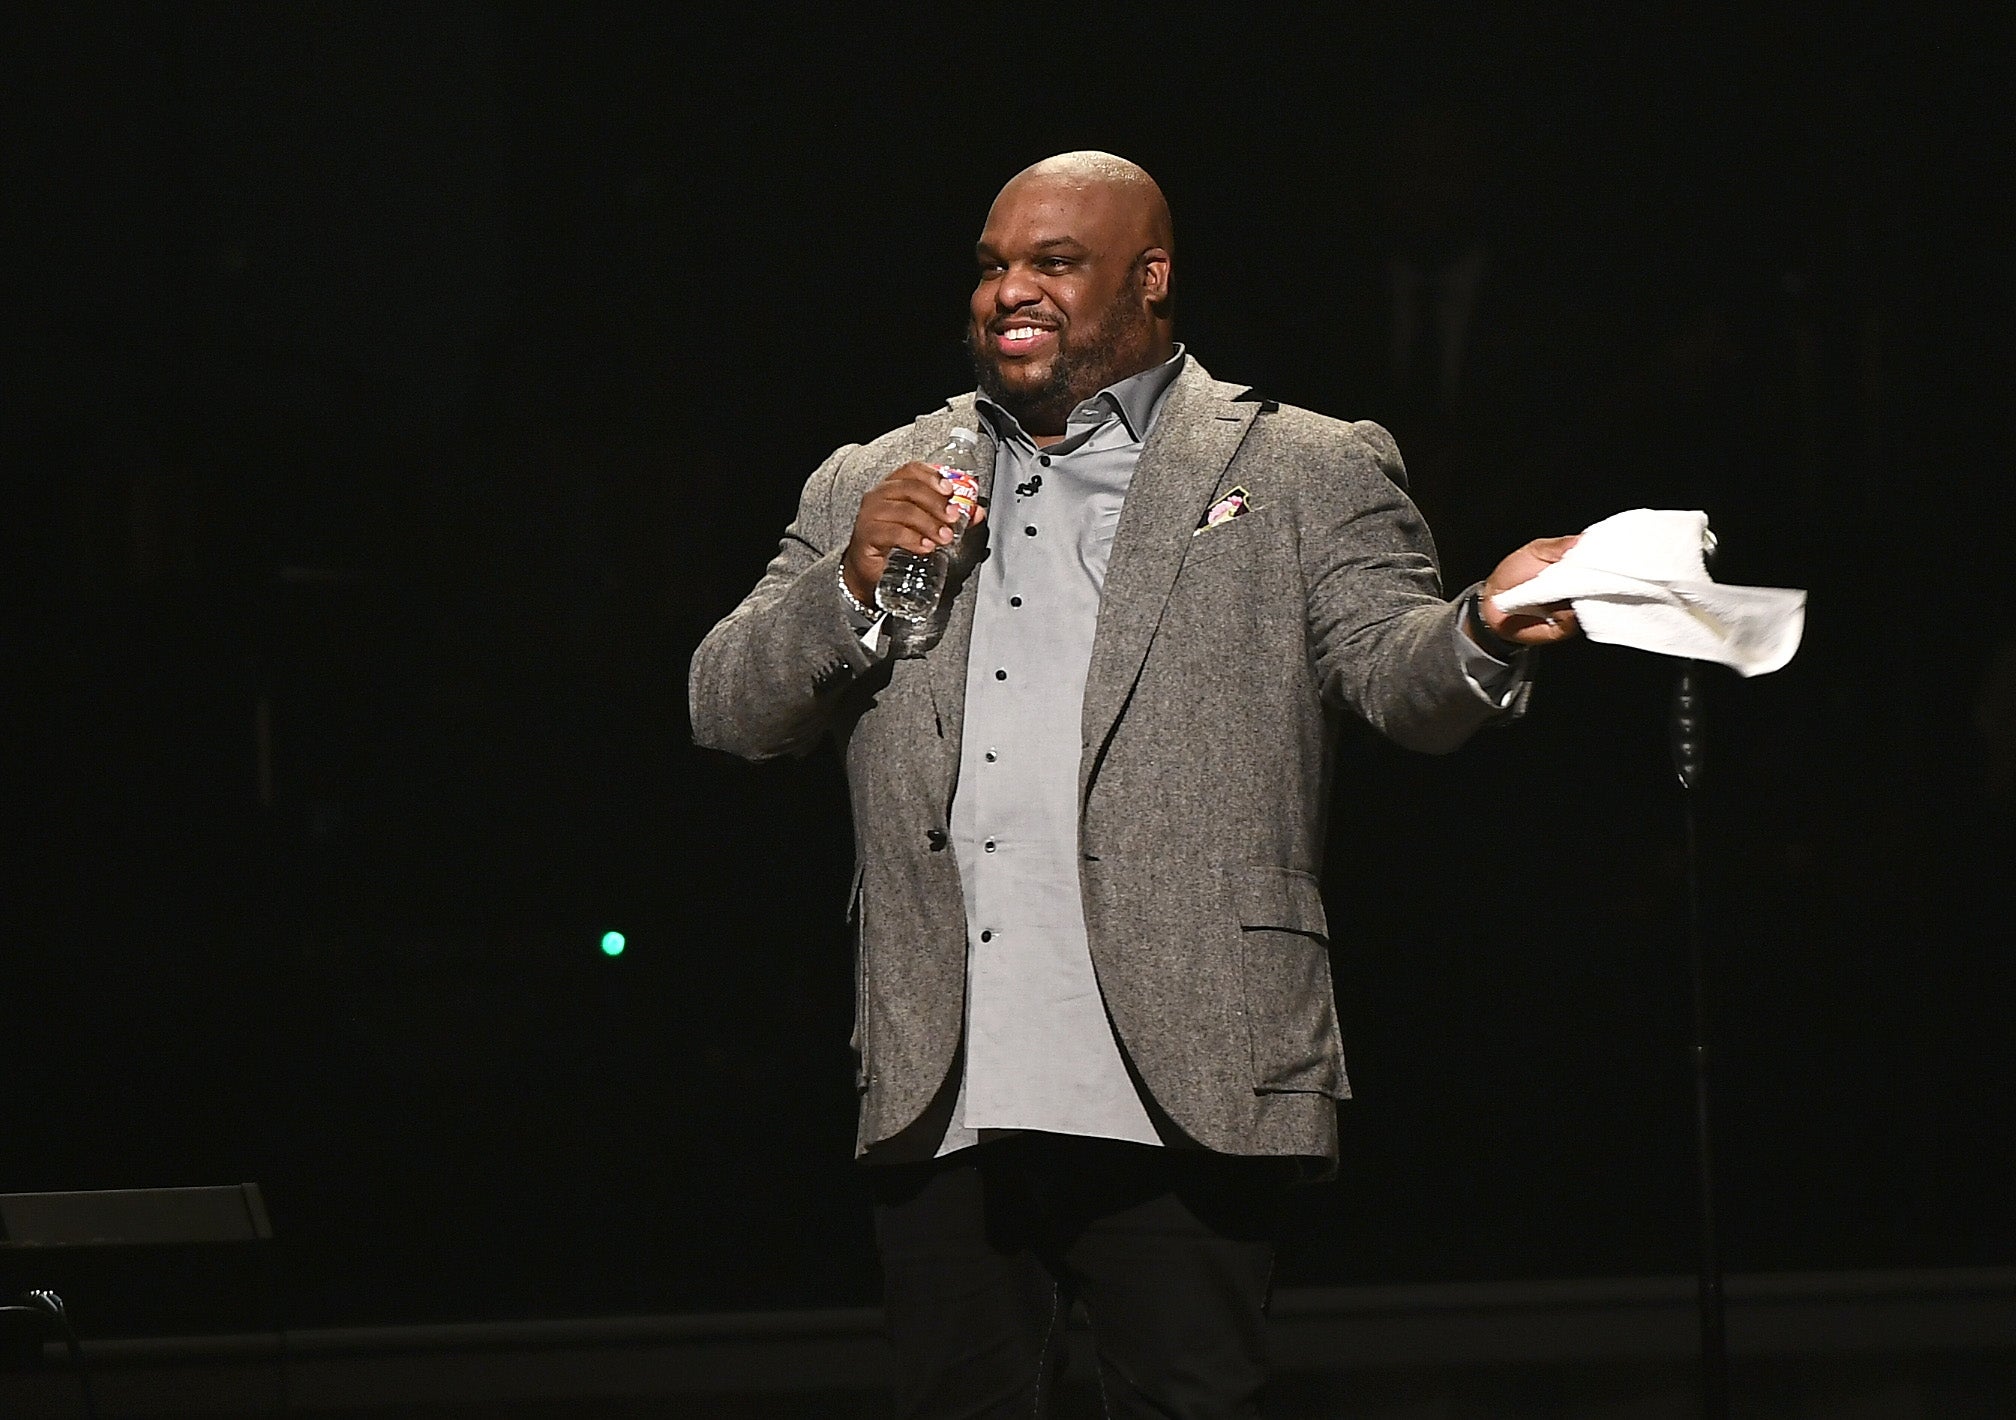 Pastor John Gray Leaves Hospital Following Life-Threatening Blood Clots: 'This Bed Was Supposed To Be My End'